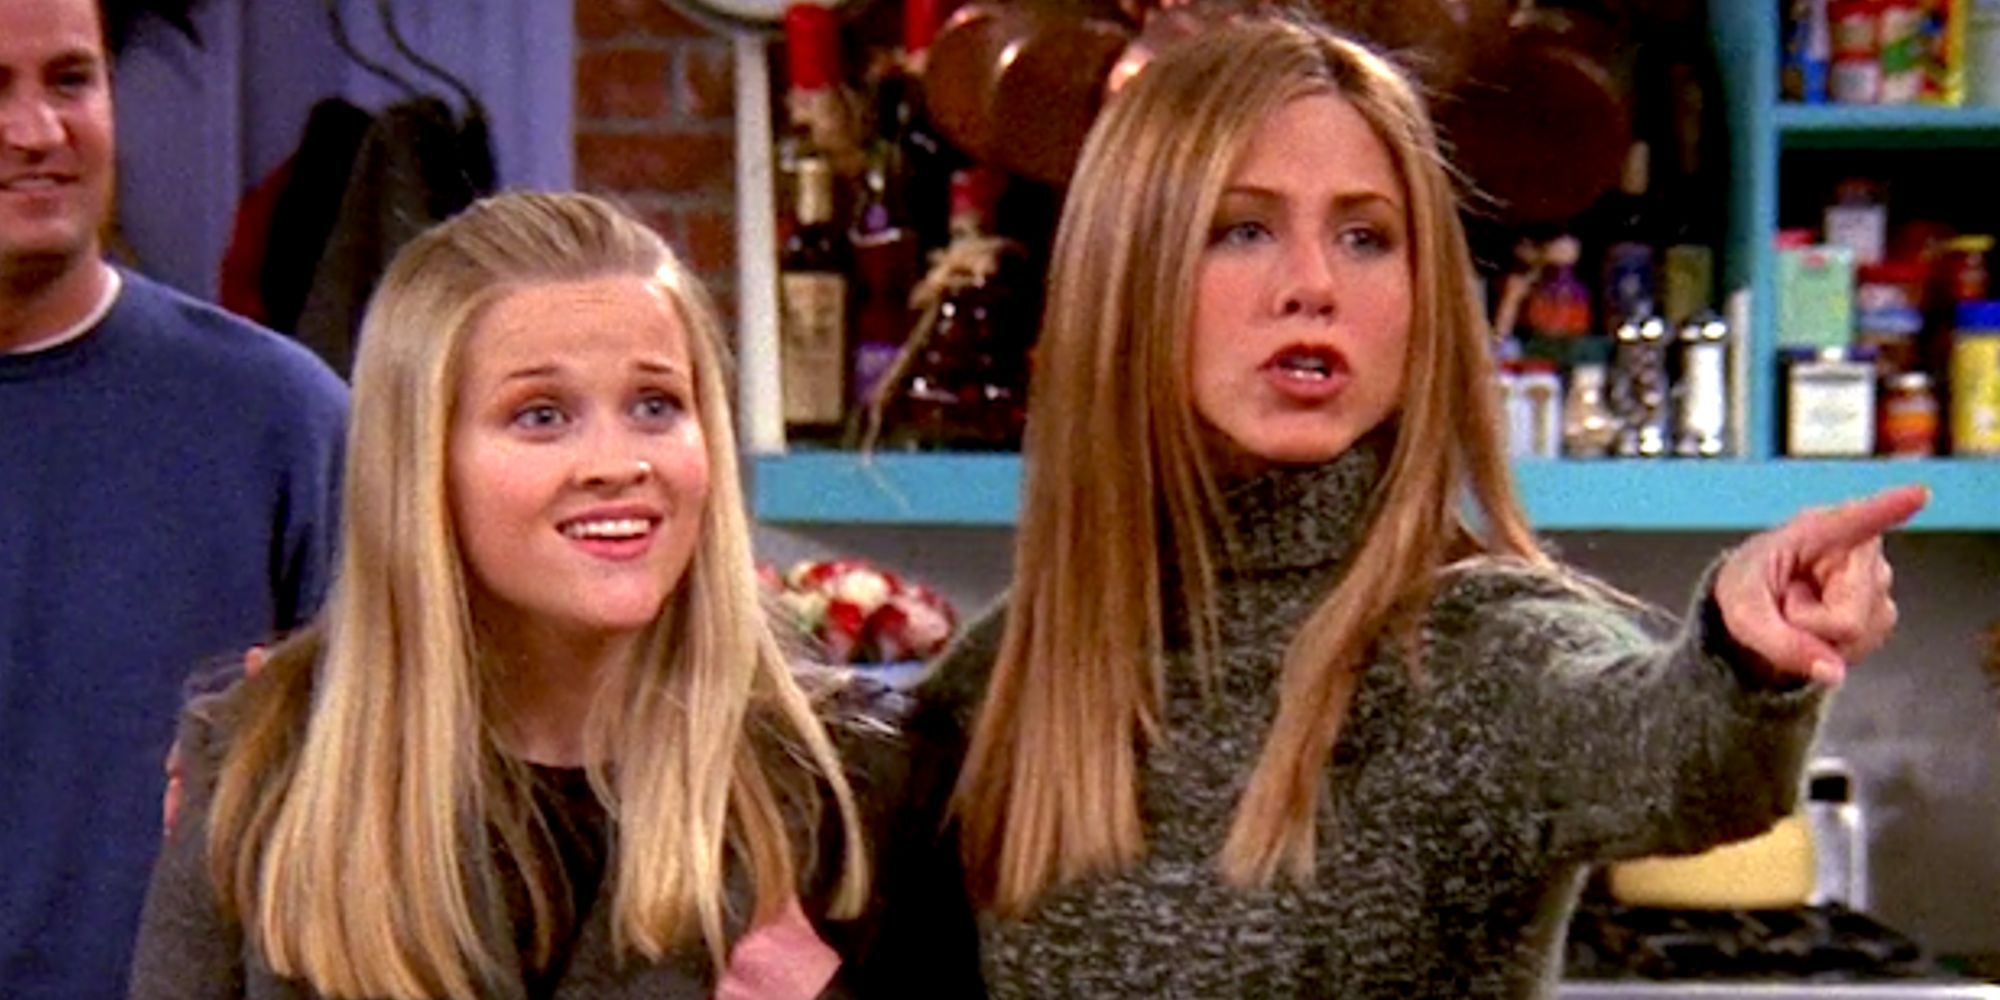 Reese Witherspoon and Jennifer Aniston as Jill and Rachel Green on Friends